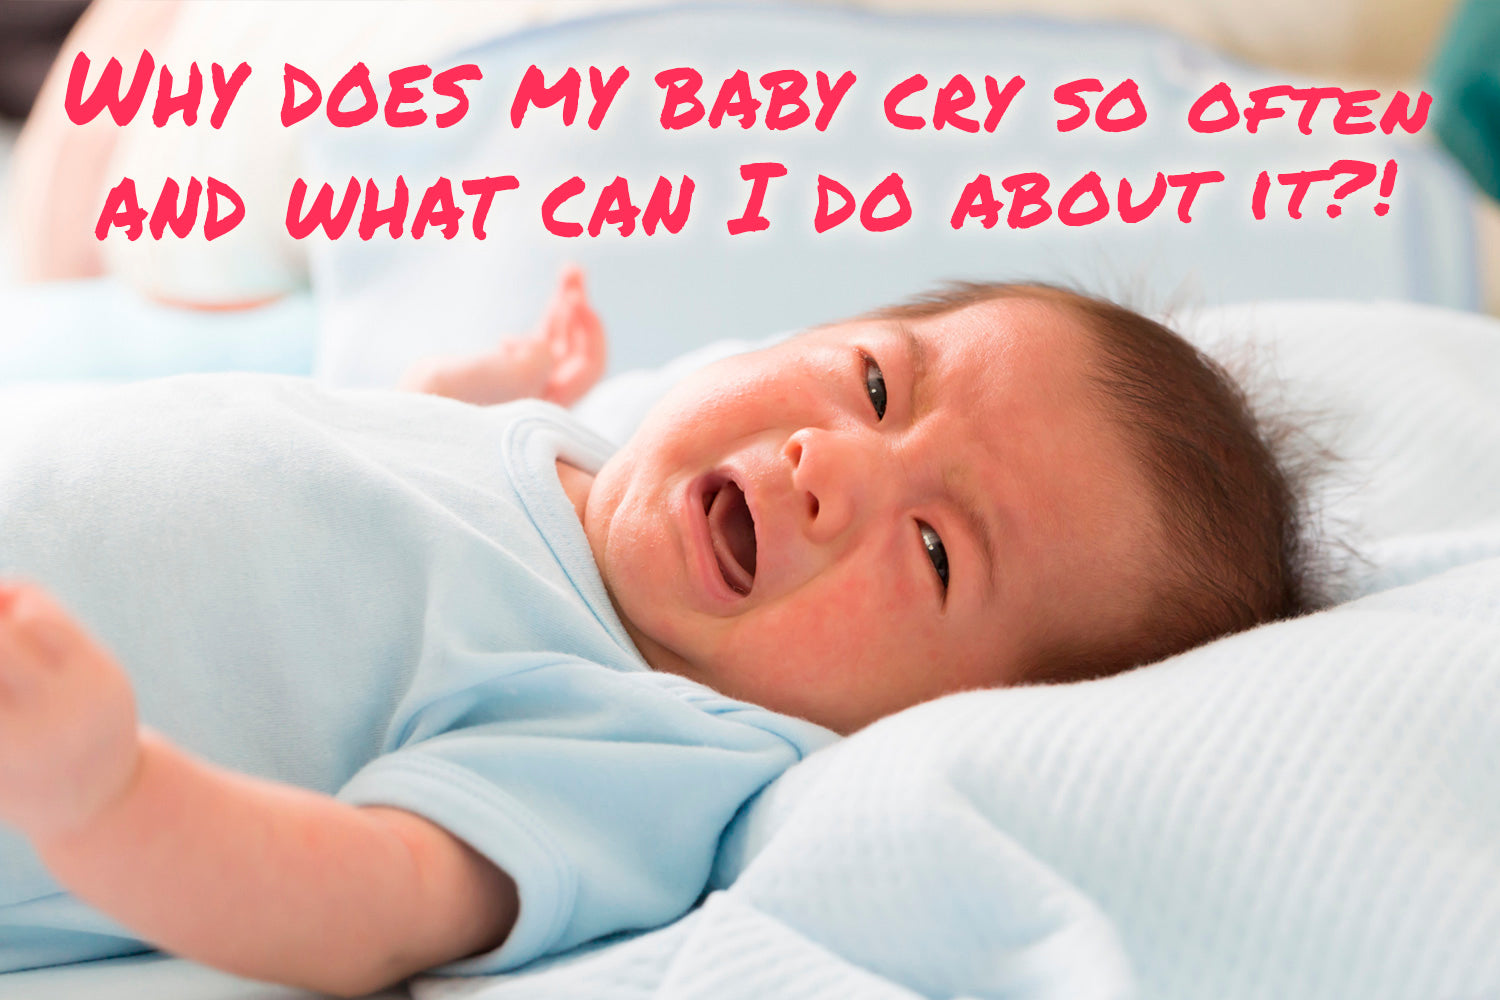 Why does my baby cry so often and what can I do about it?!